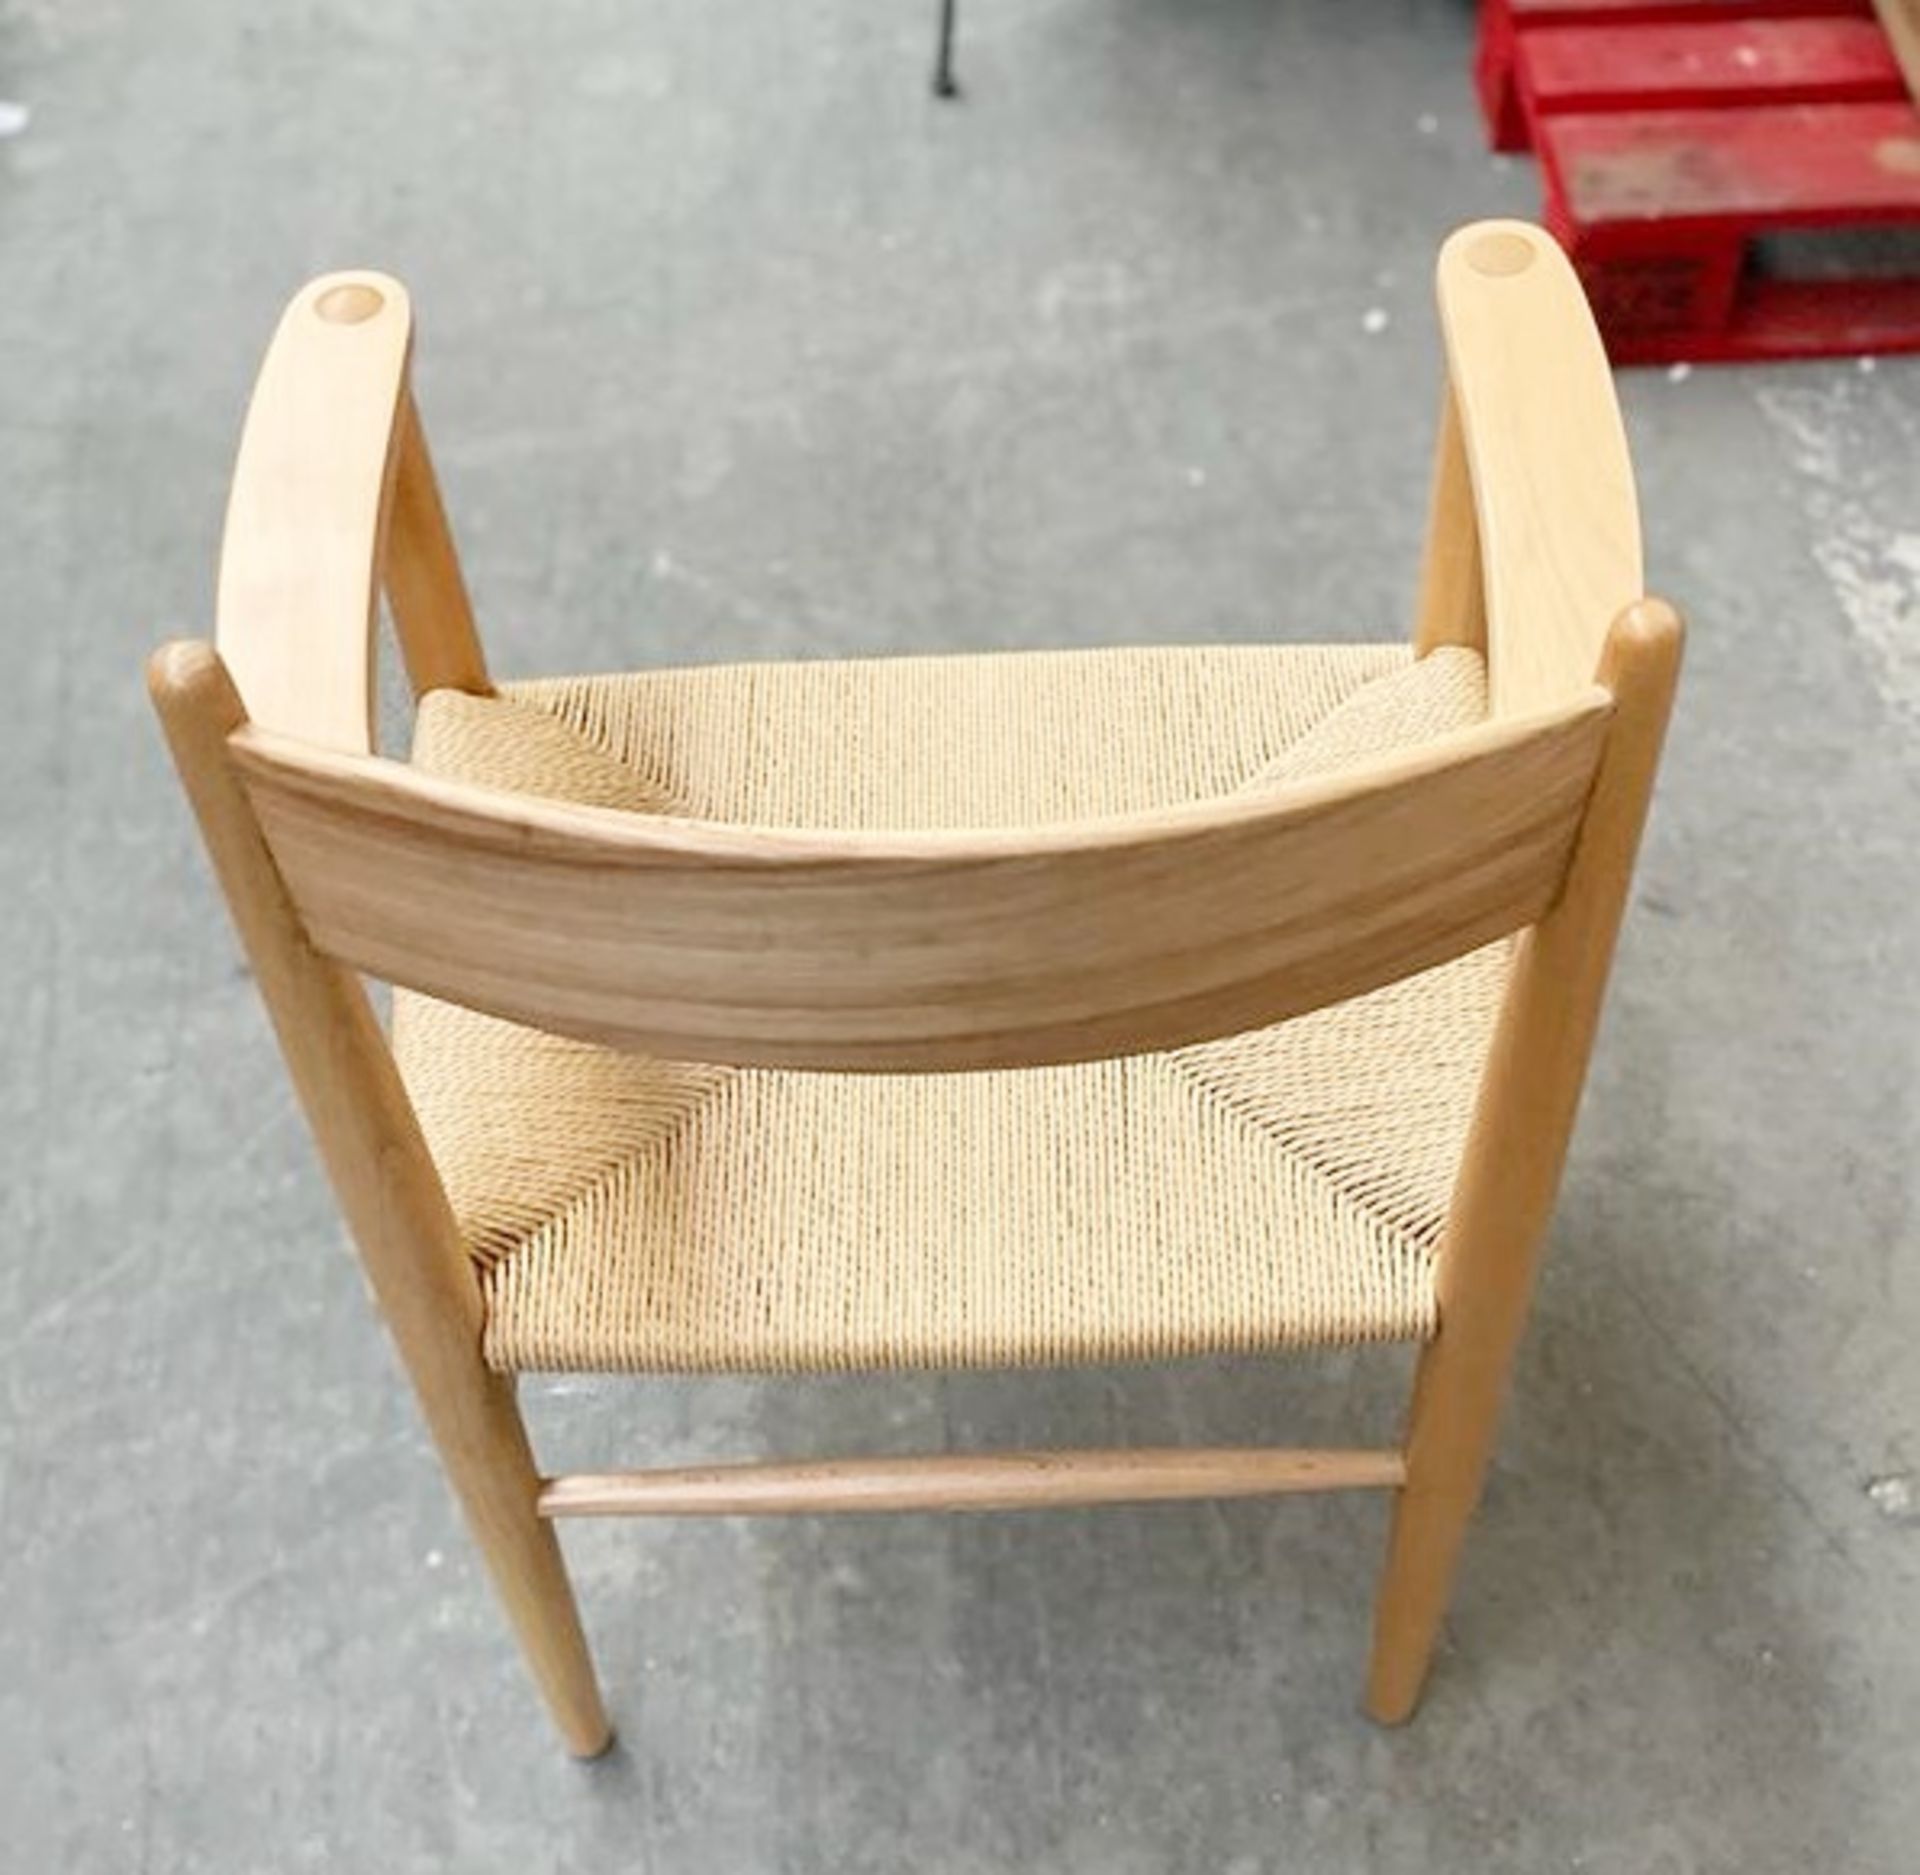 1 x Natural + Natural Cord Chair With Arm Rests - Dimensions: 50(h) x 48(d) x 58(w) cm - Brand New - Image 2 of 6